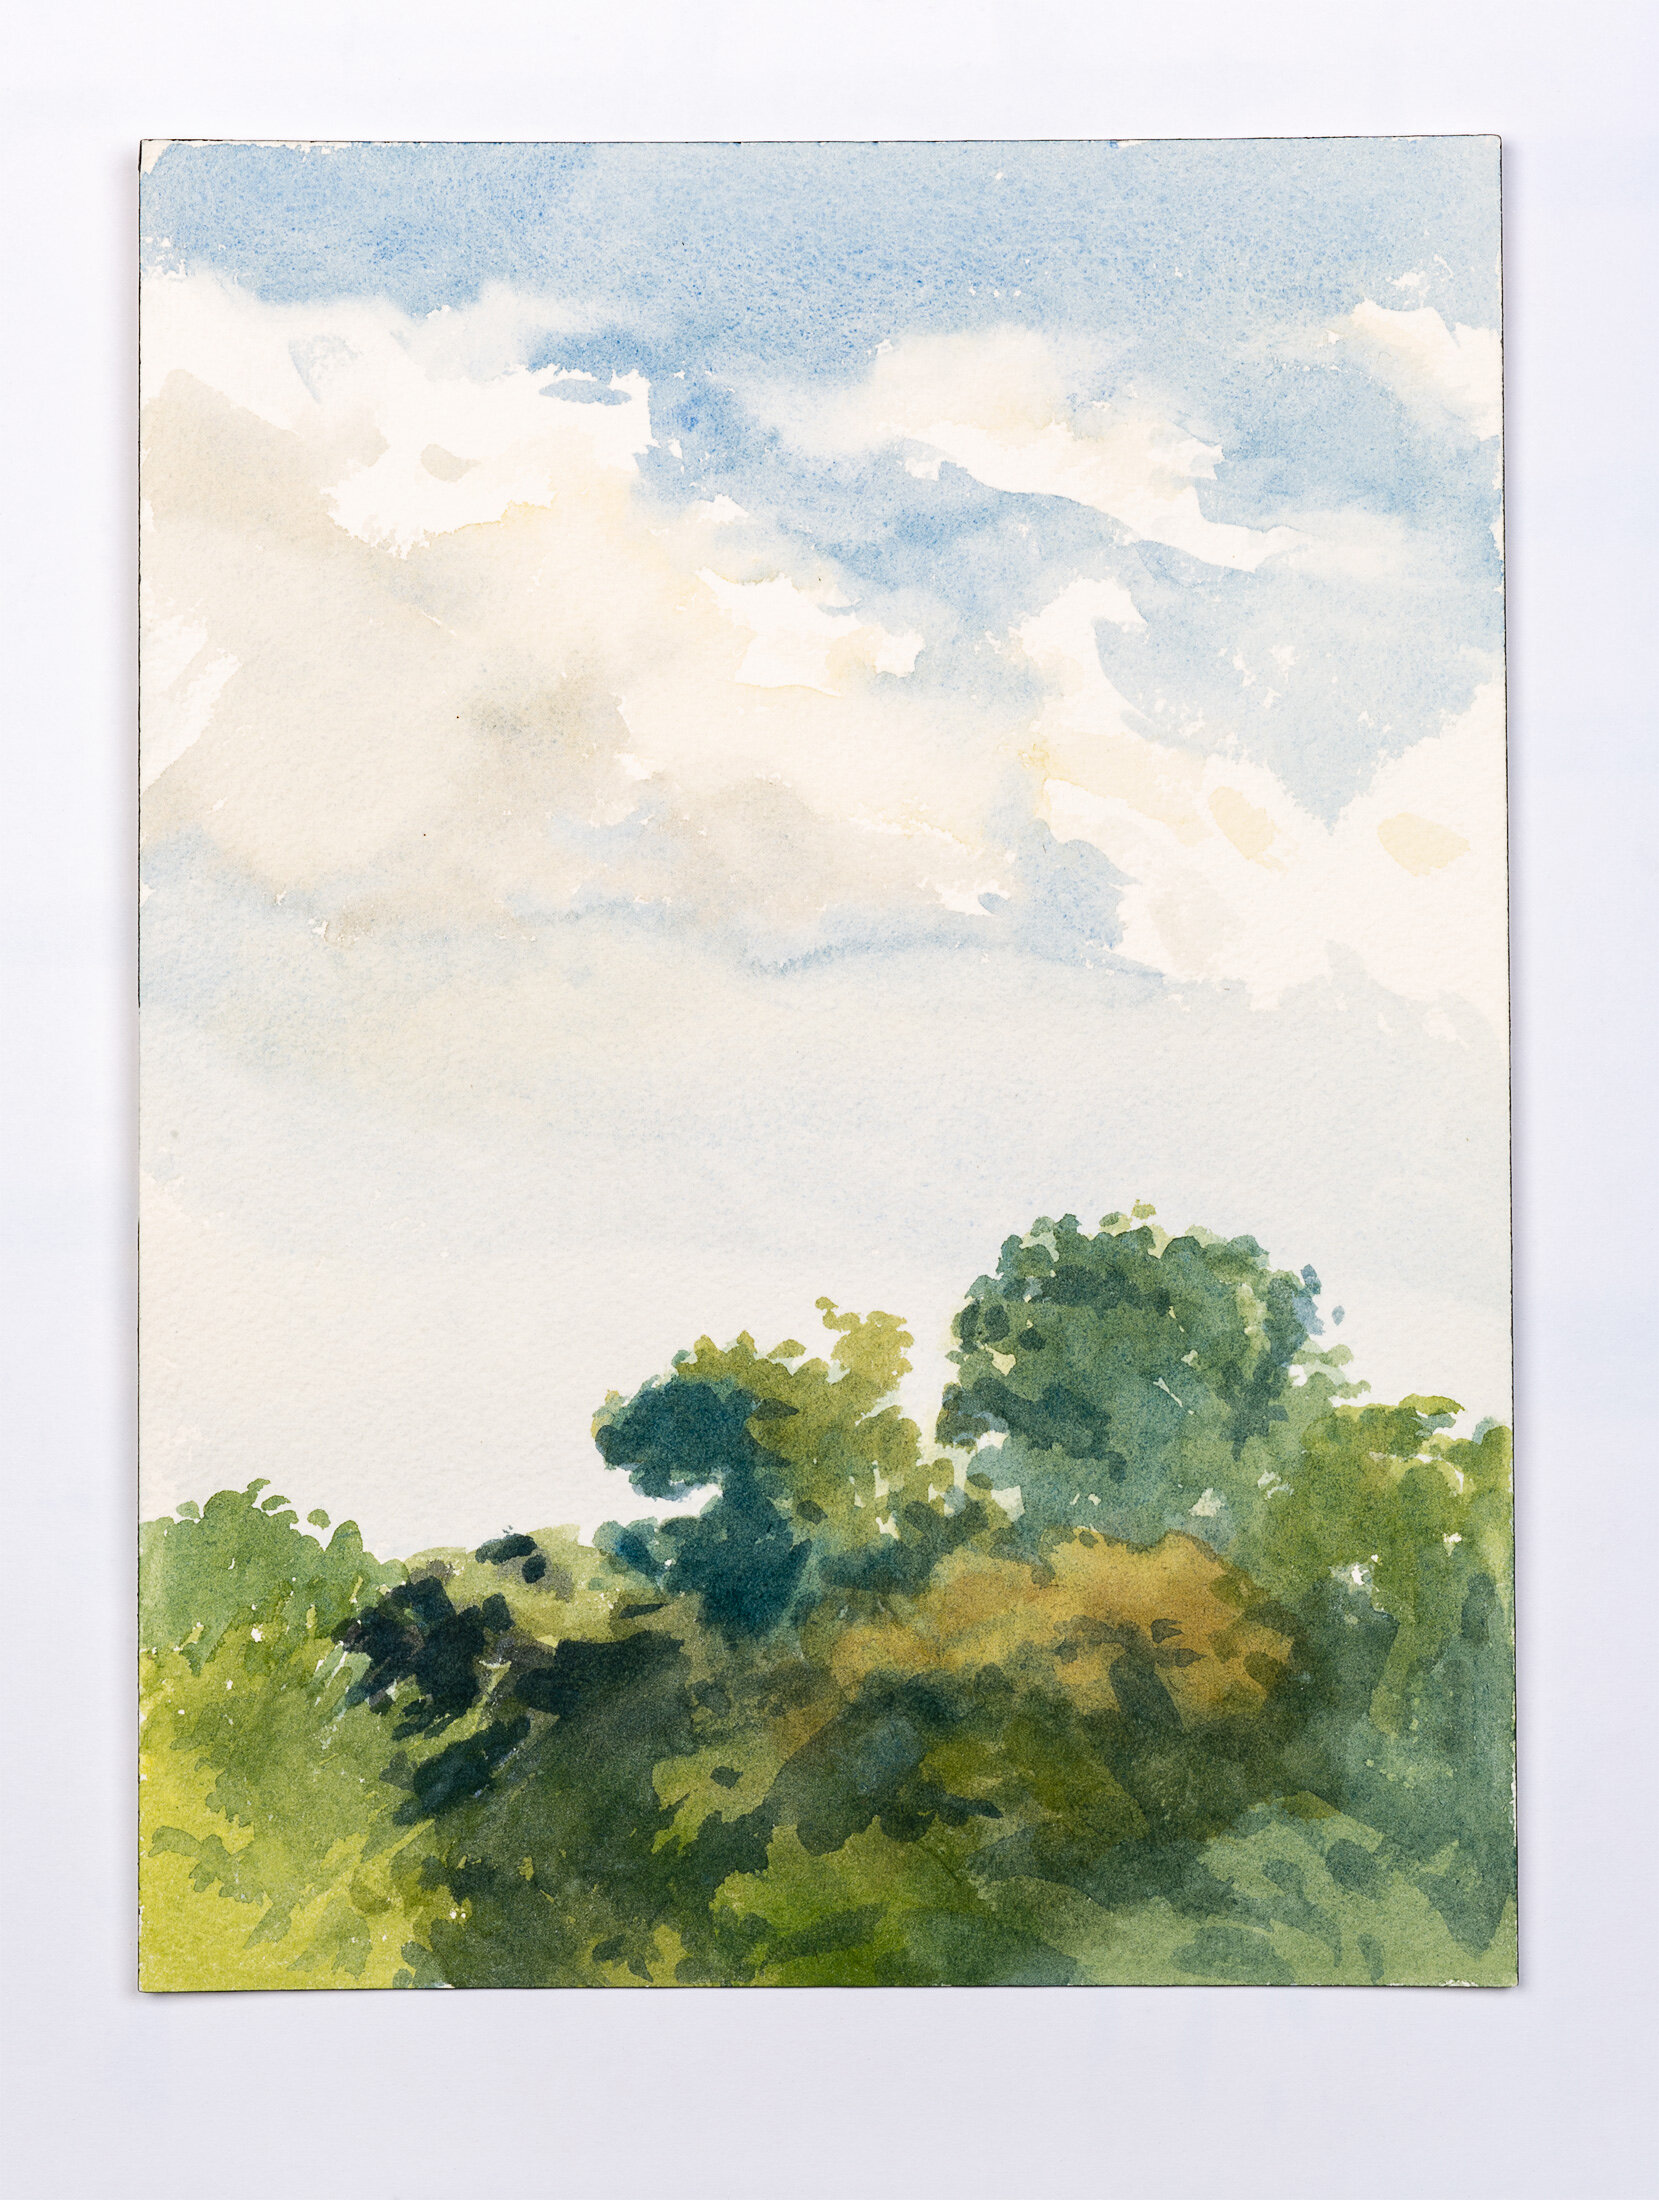 Clouds over Trees, 2013 - watercolor on paper